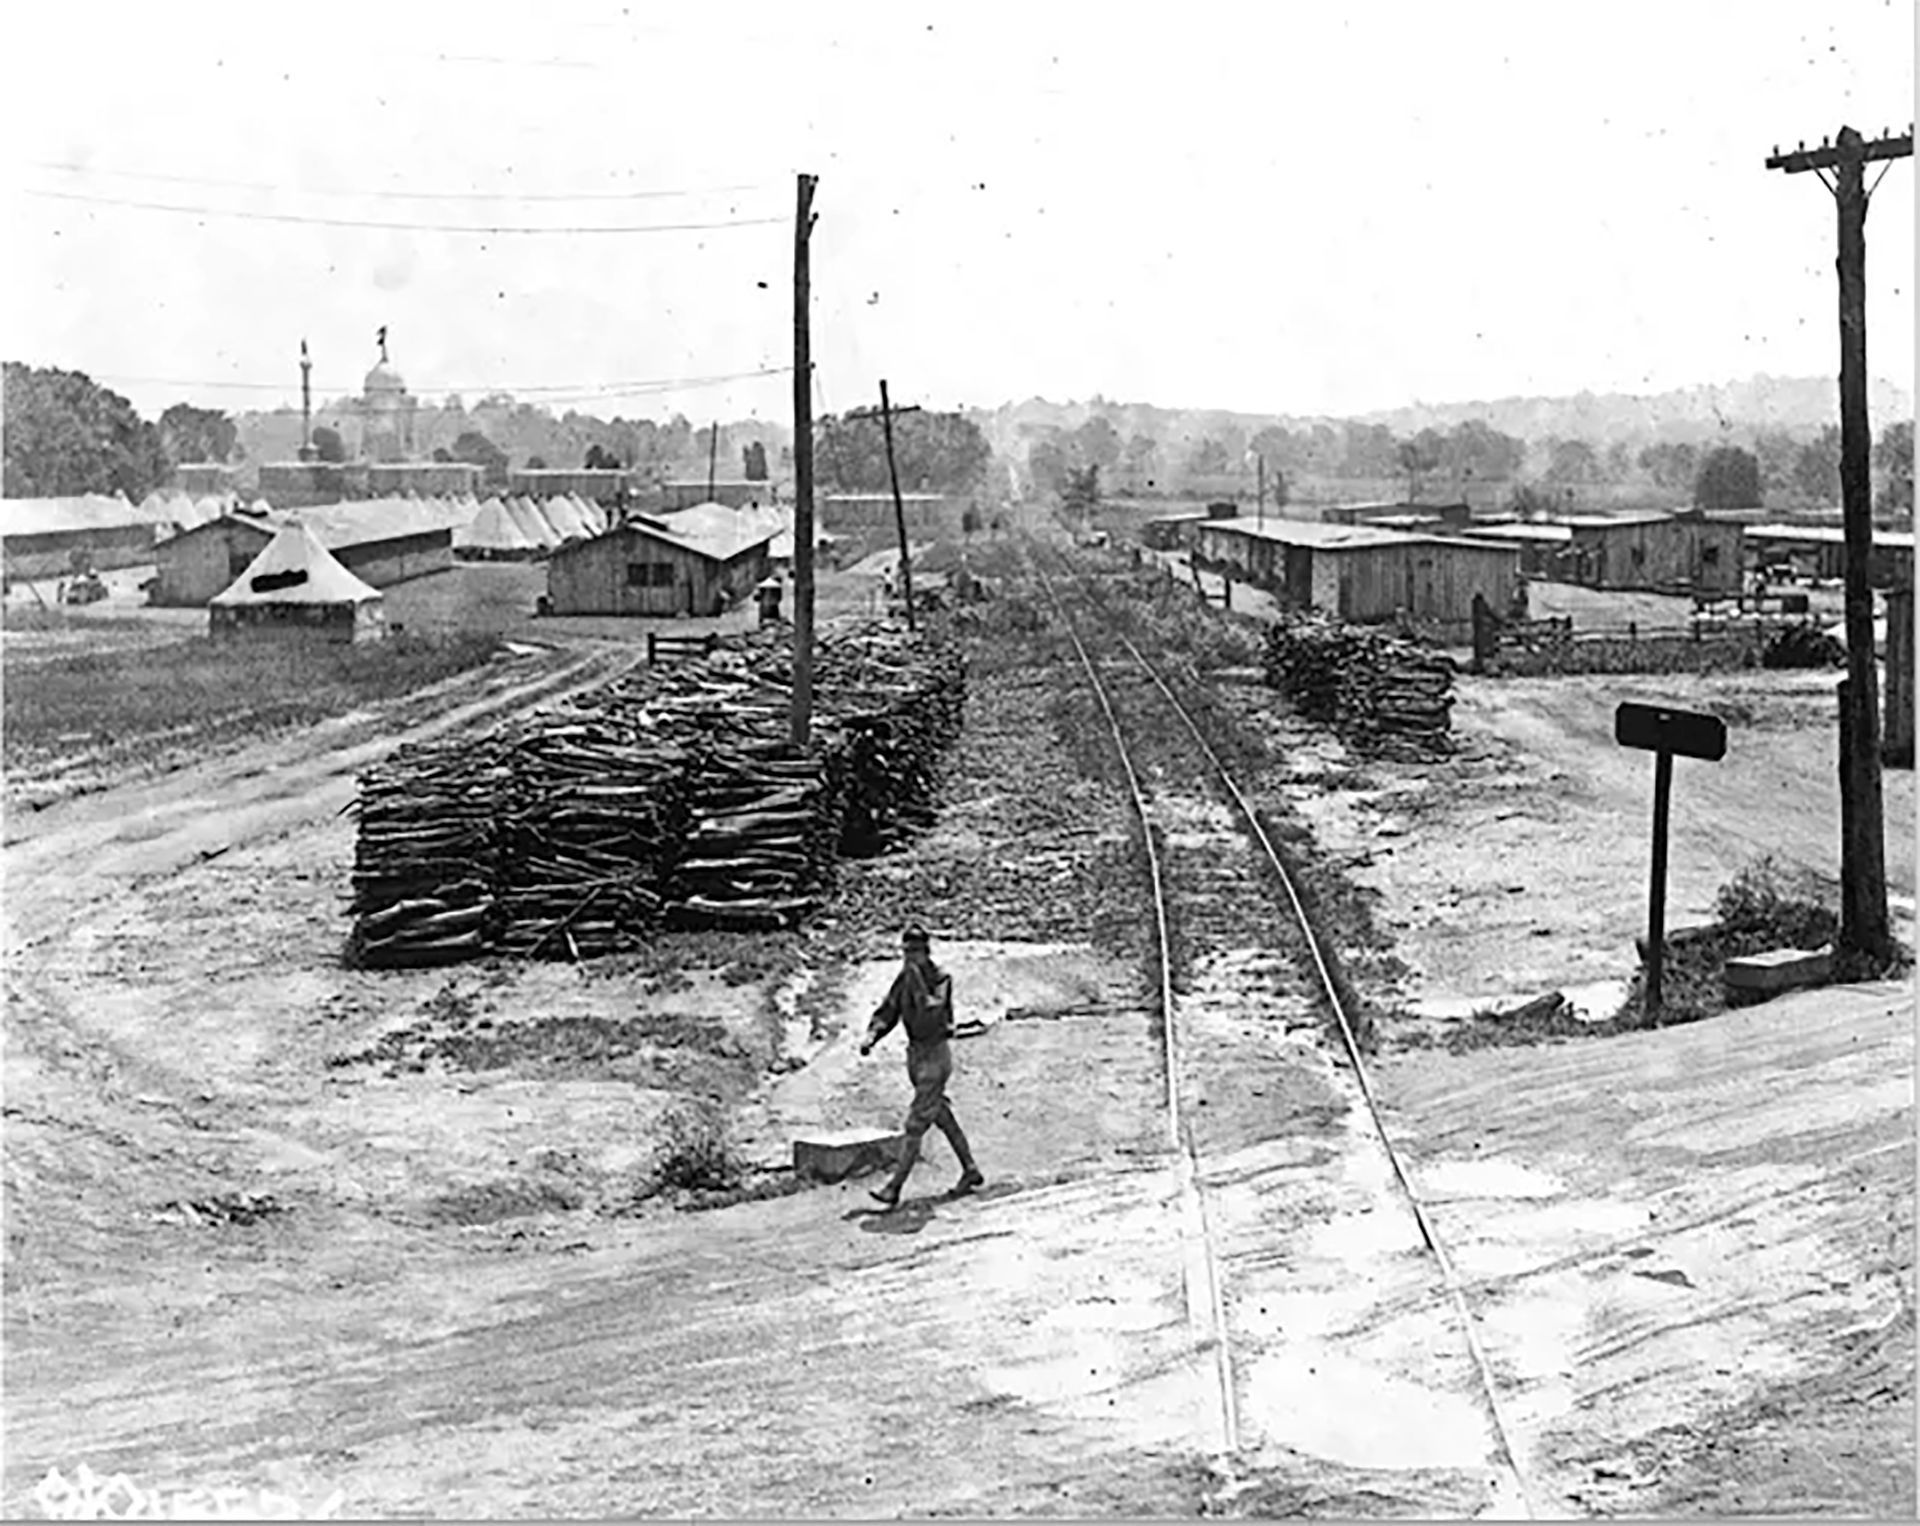 Camp Colt in 1918 -- Note the PA Memorial in distance (National Park Service)